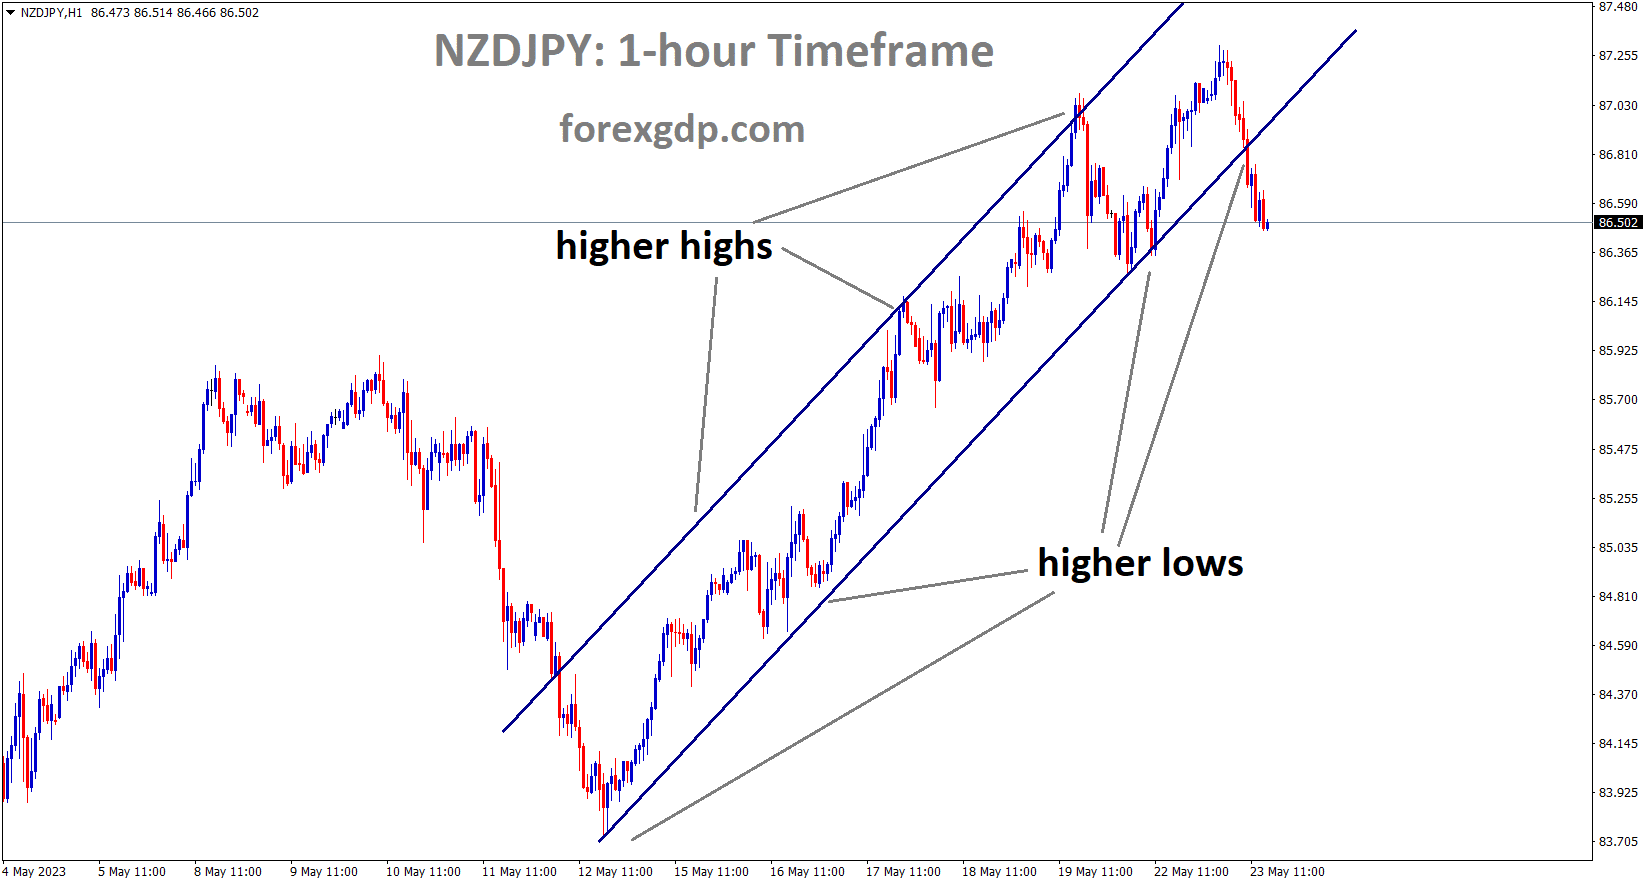 NZDJPY H1 TF analysis market is moving in an Ascending channel and the market has reached the higher low area of the channel